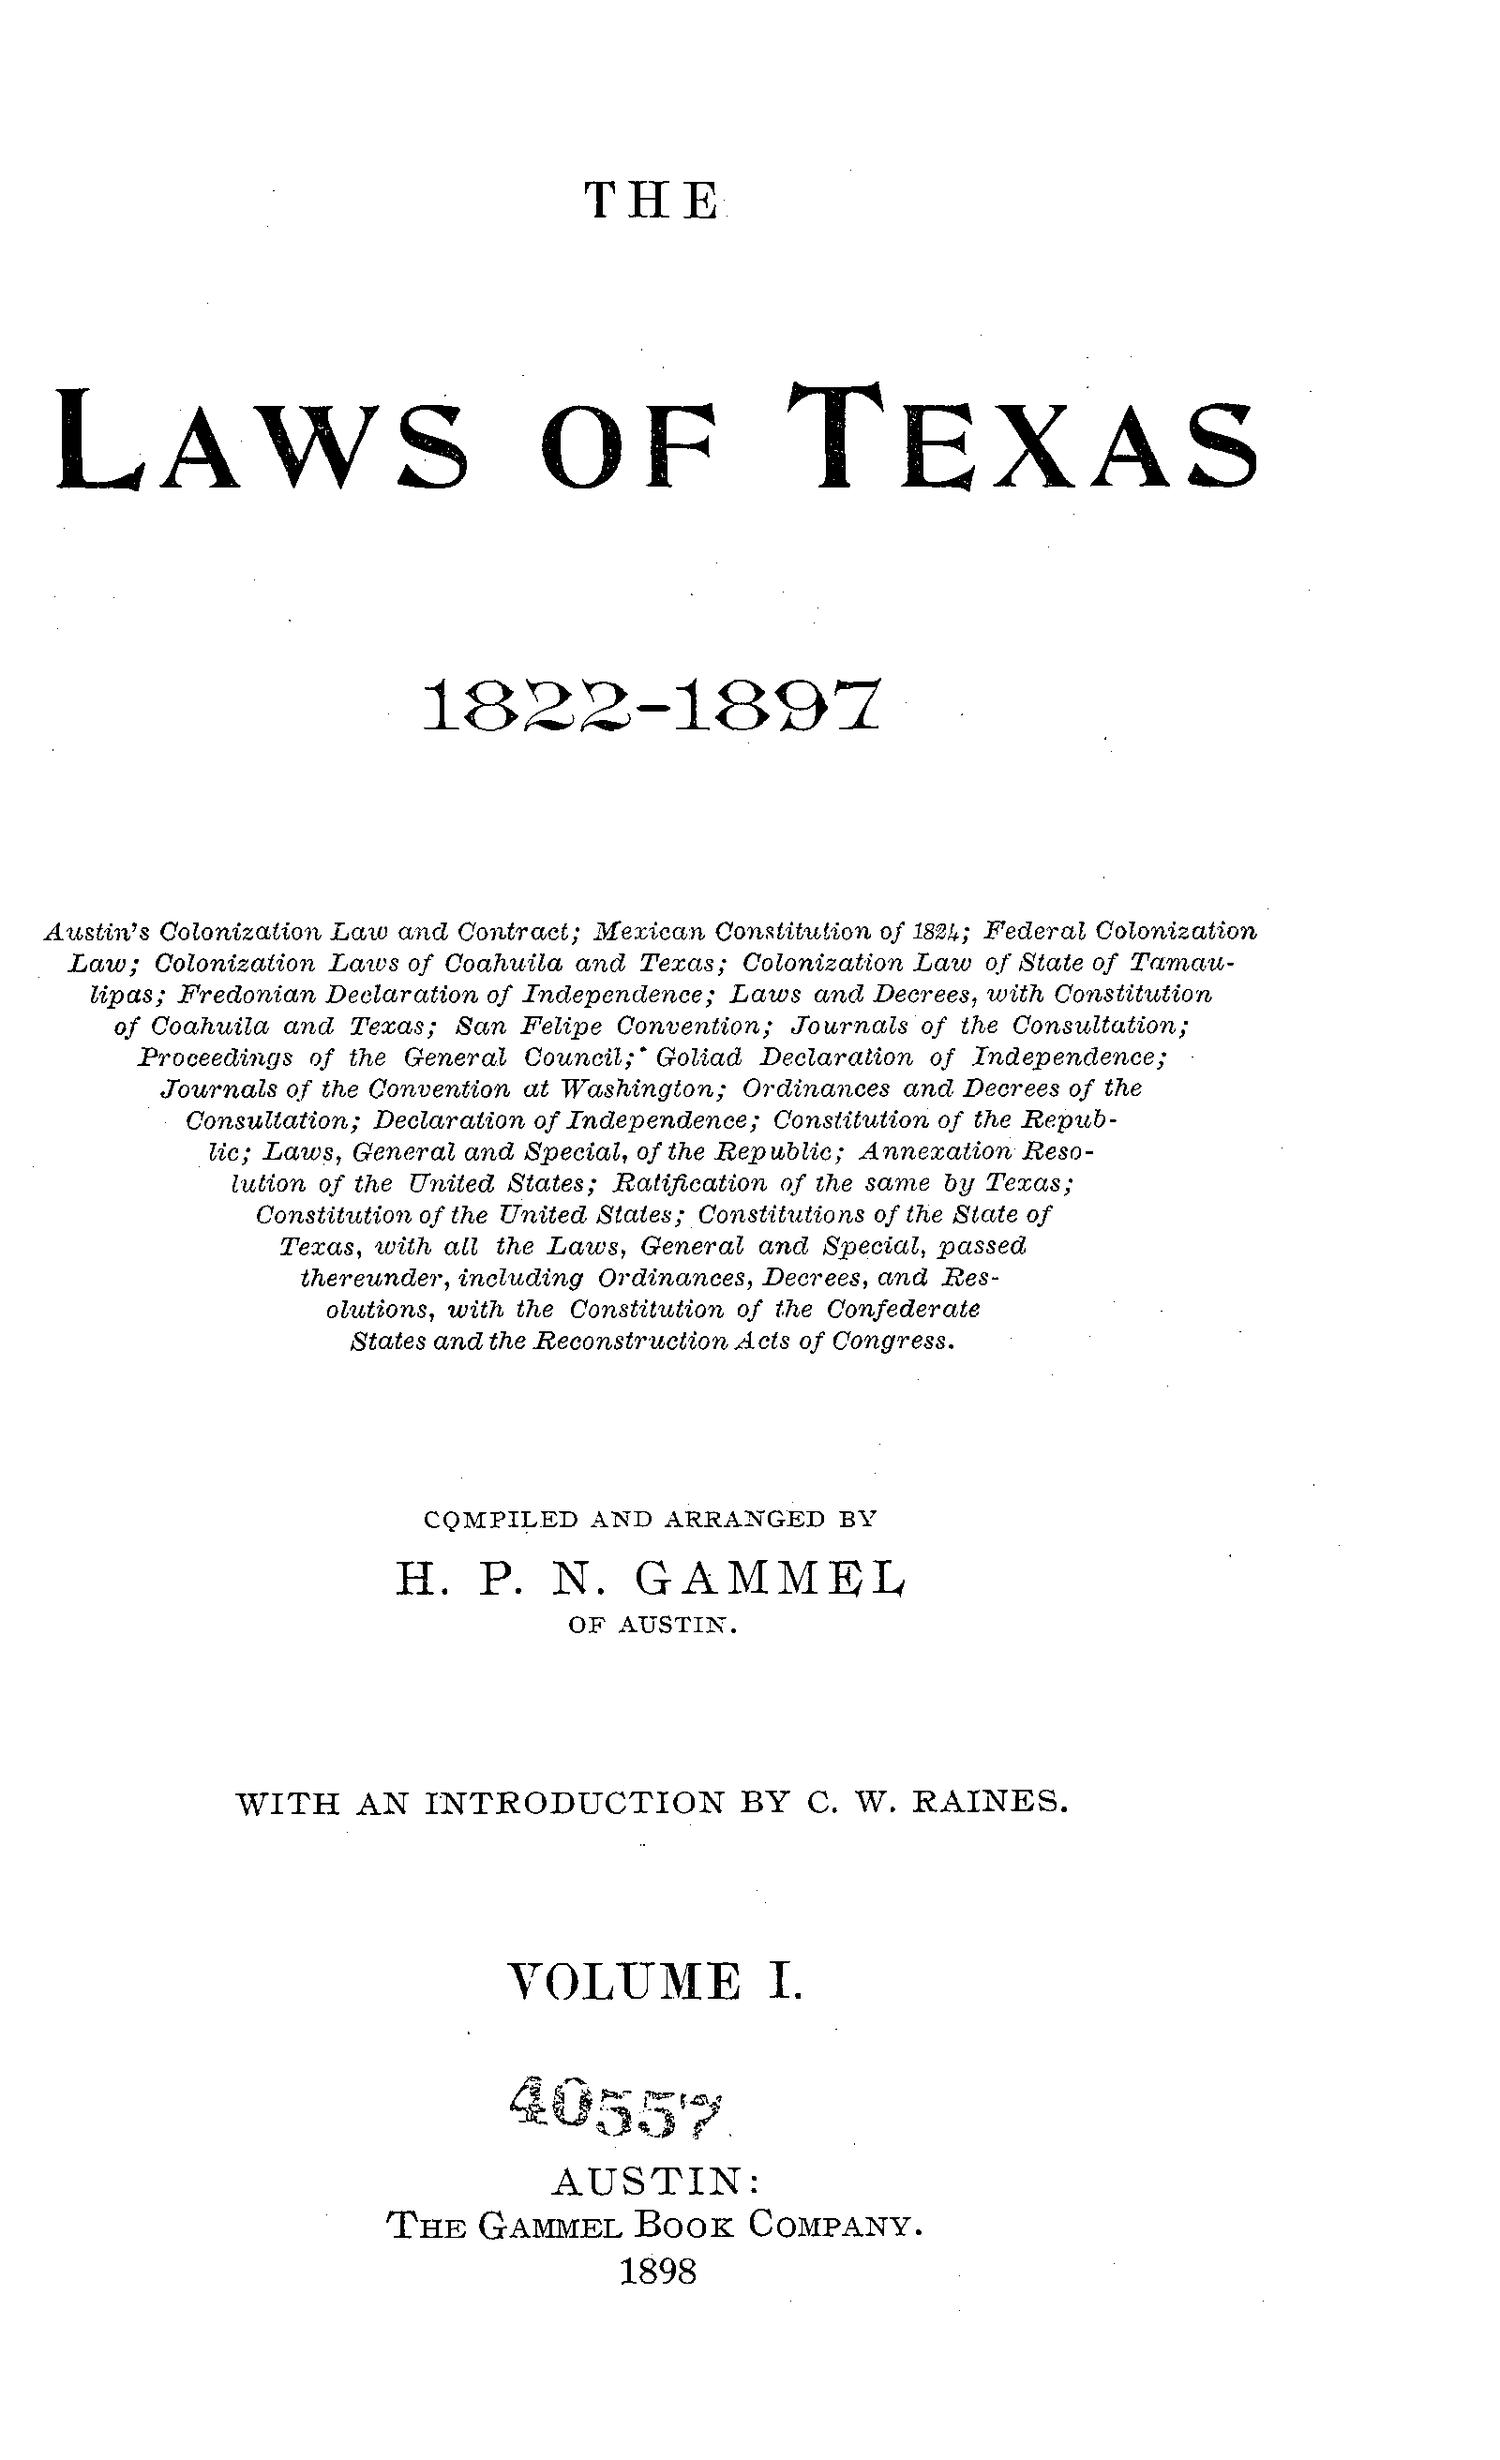 The Laws of Texas, 1822-1897 Volume 1
                                                
                                                    a
                                                